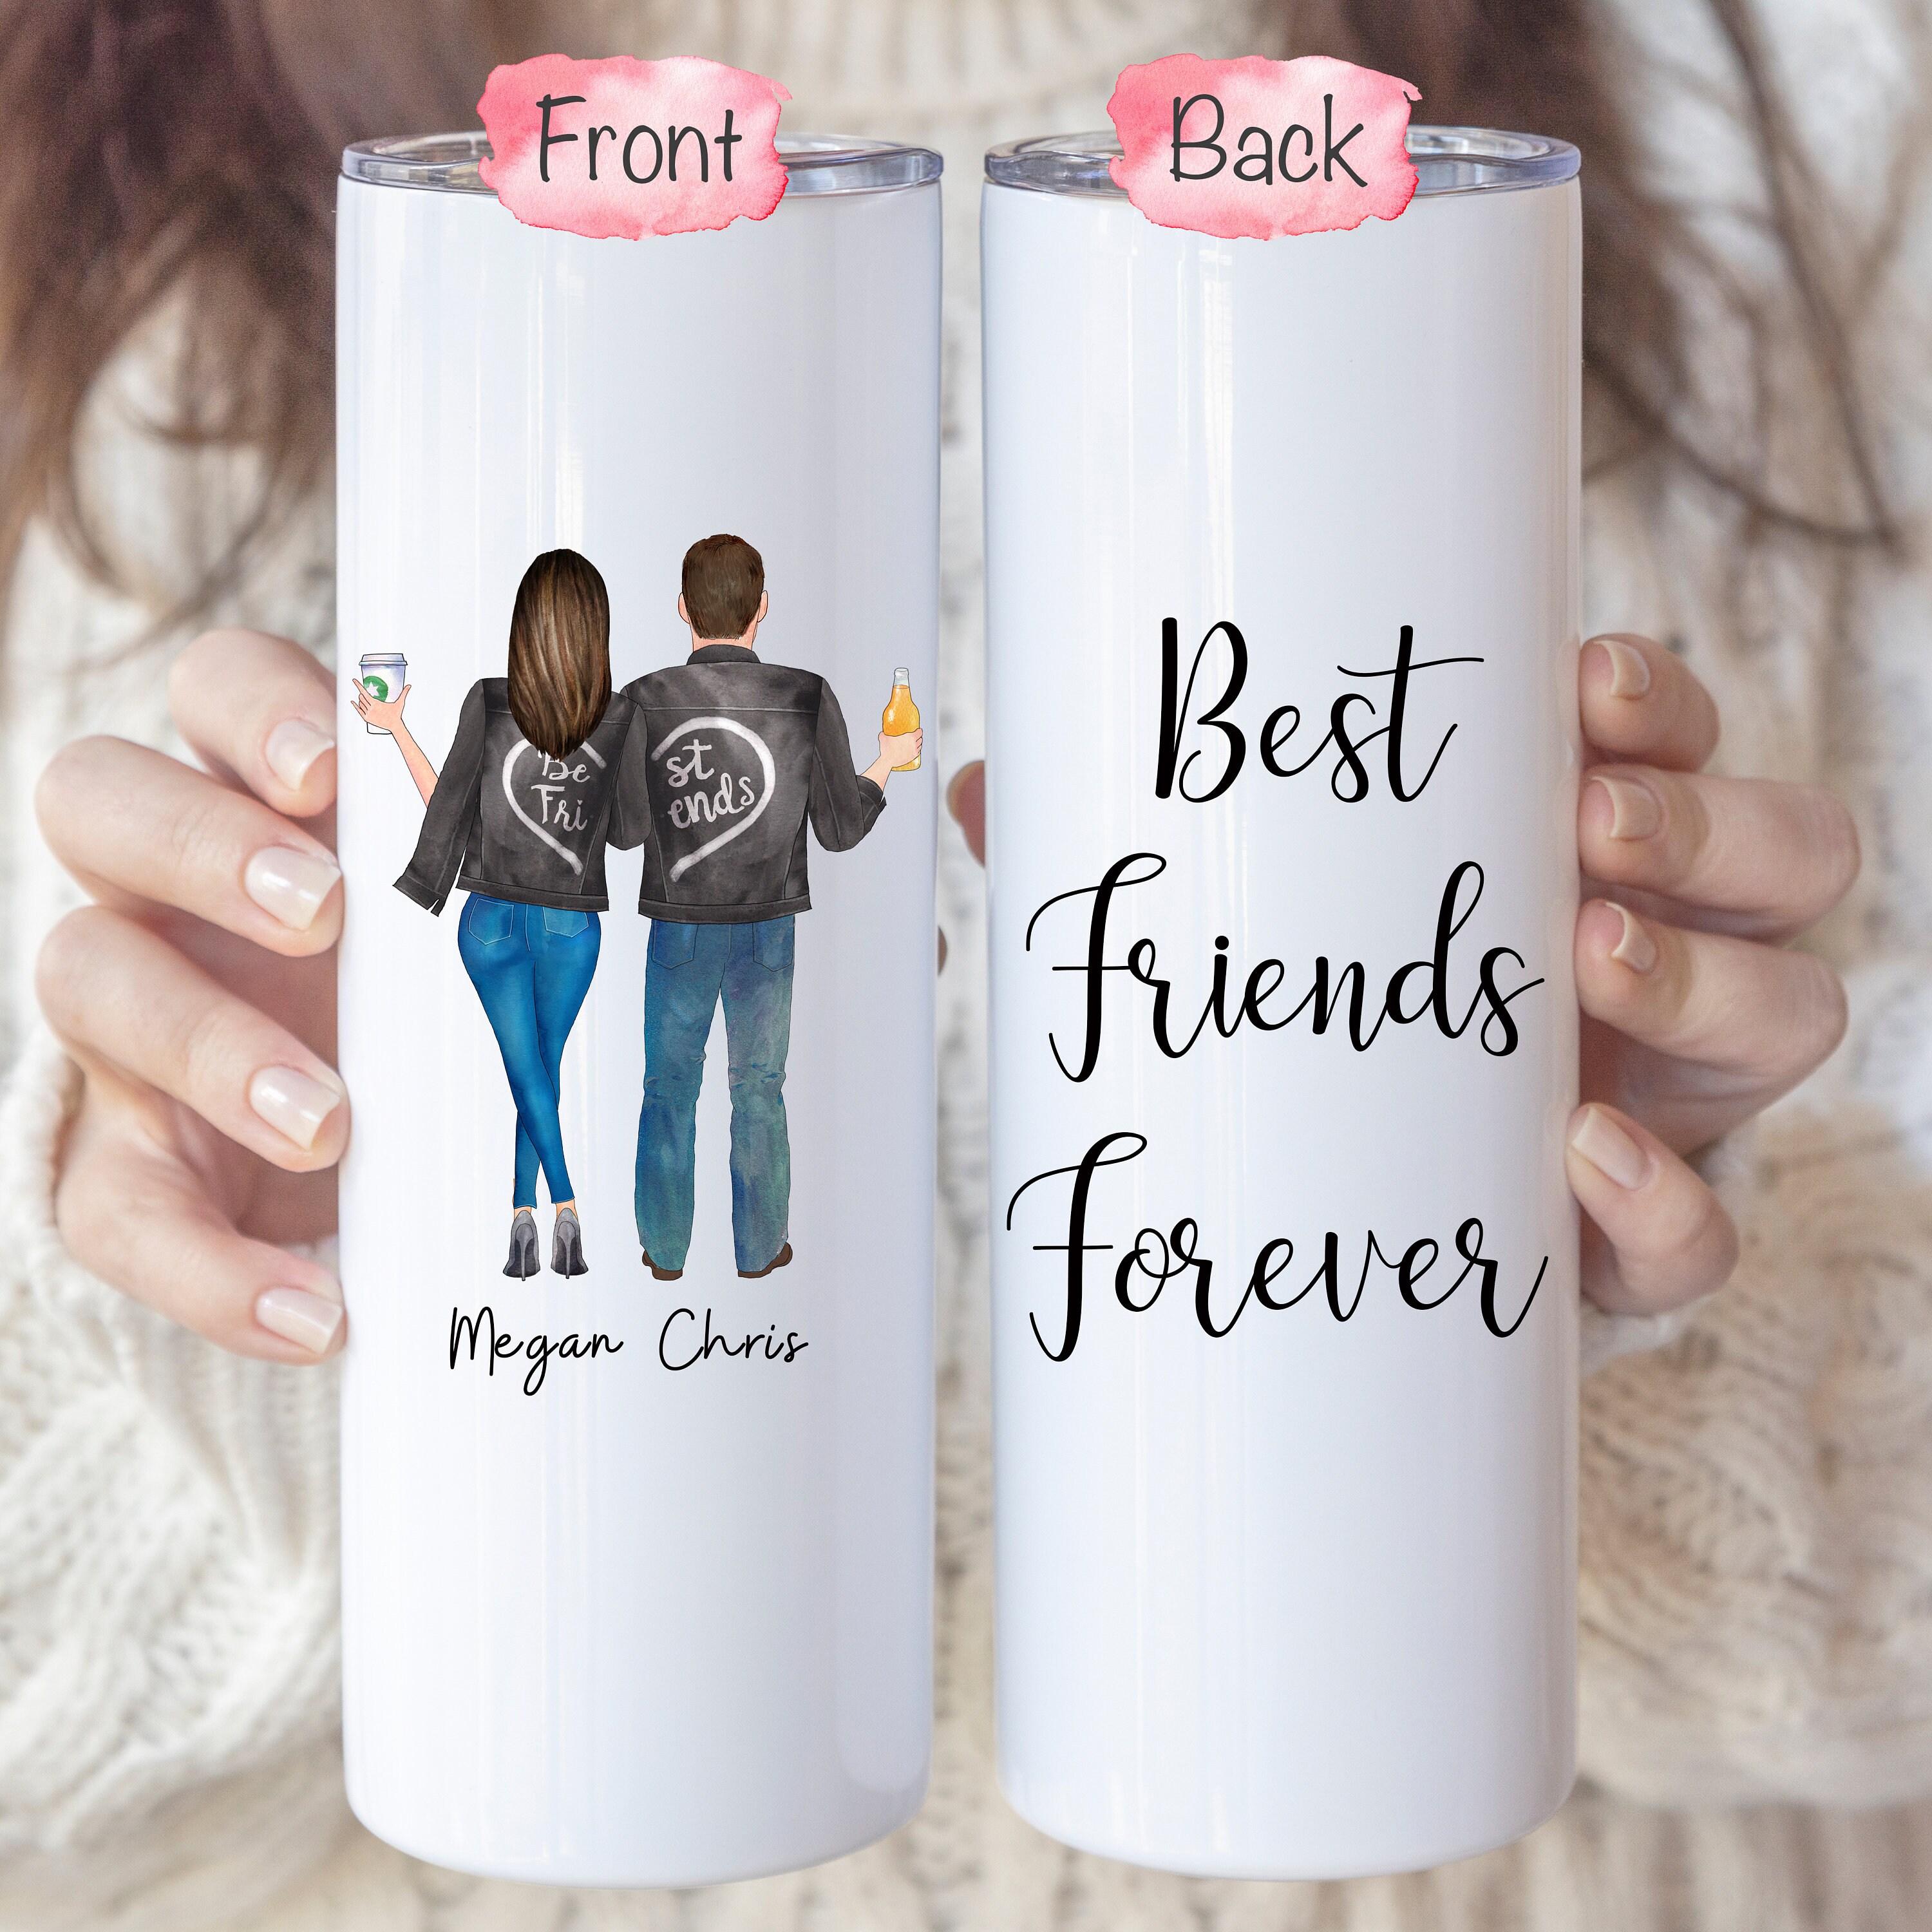 Friend Gift for Men: Best Friend Ever! Large Insulated Tumbler